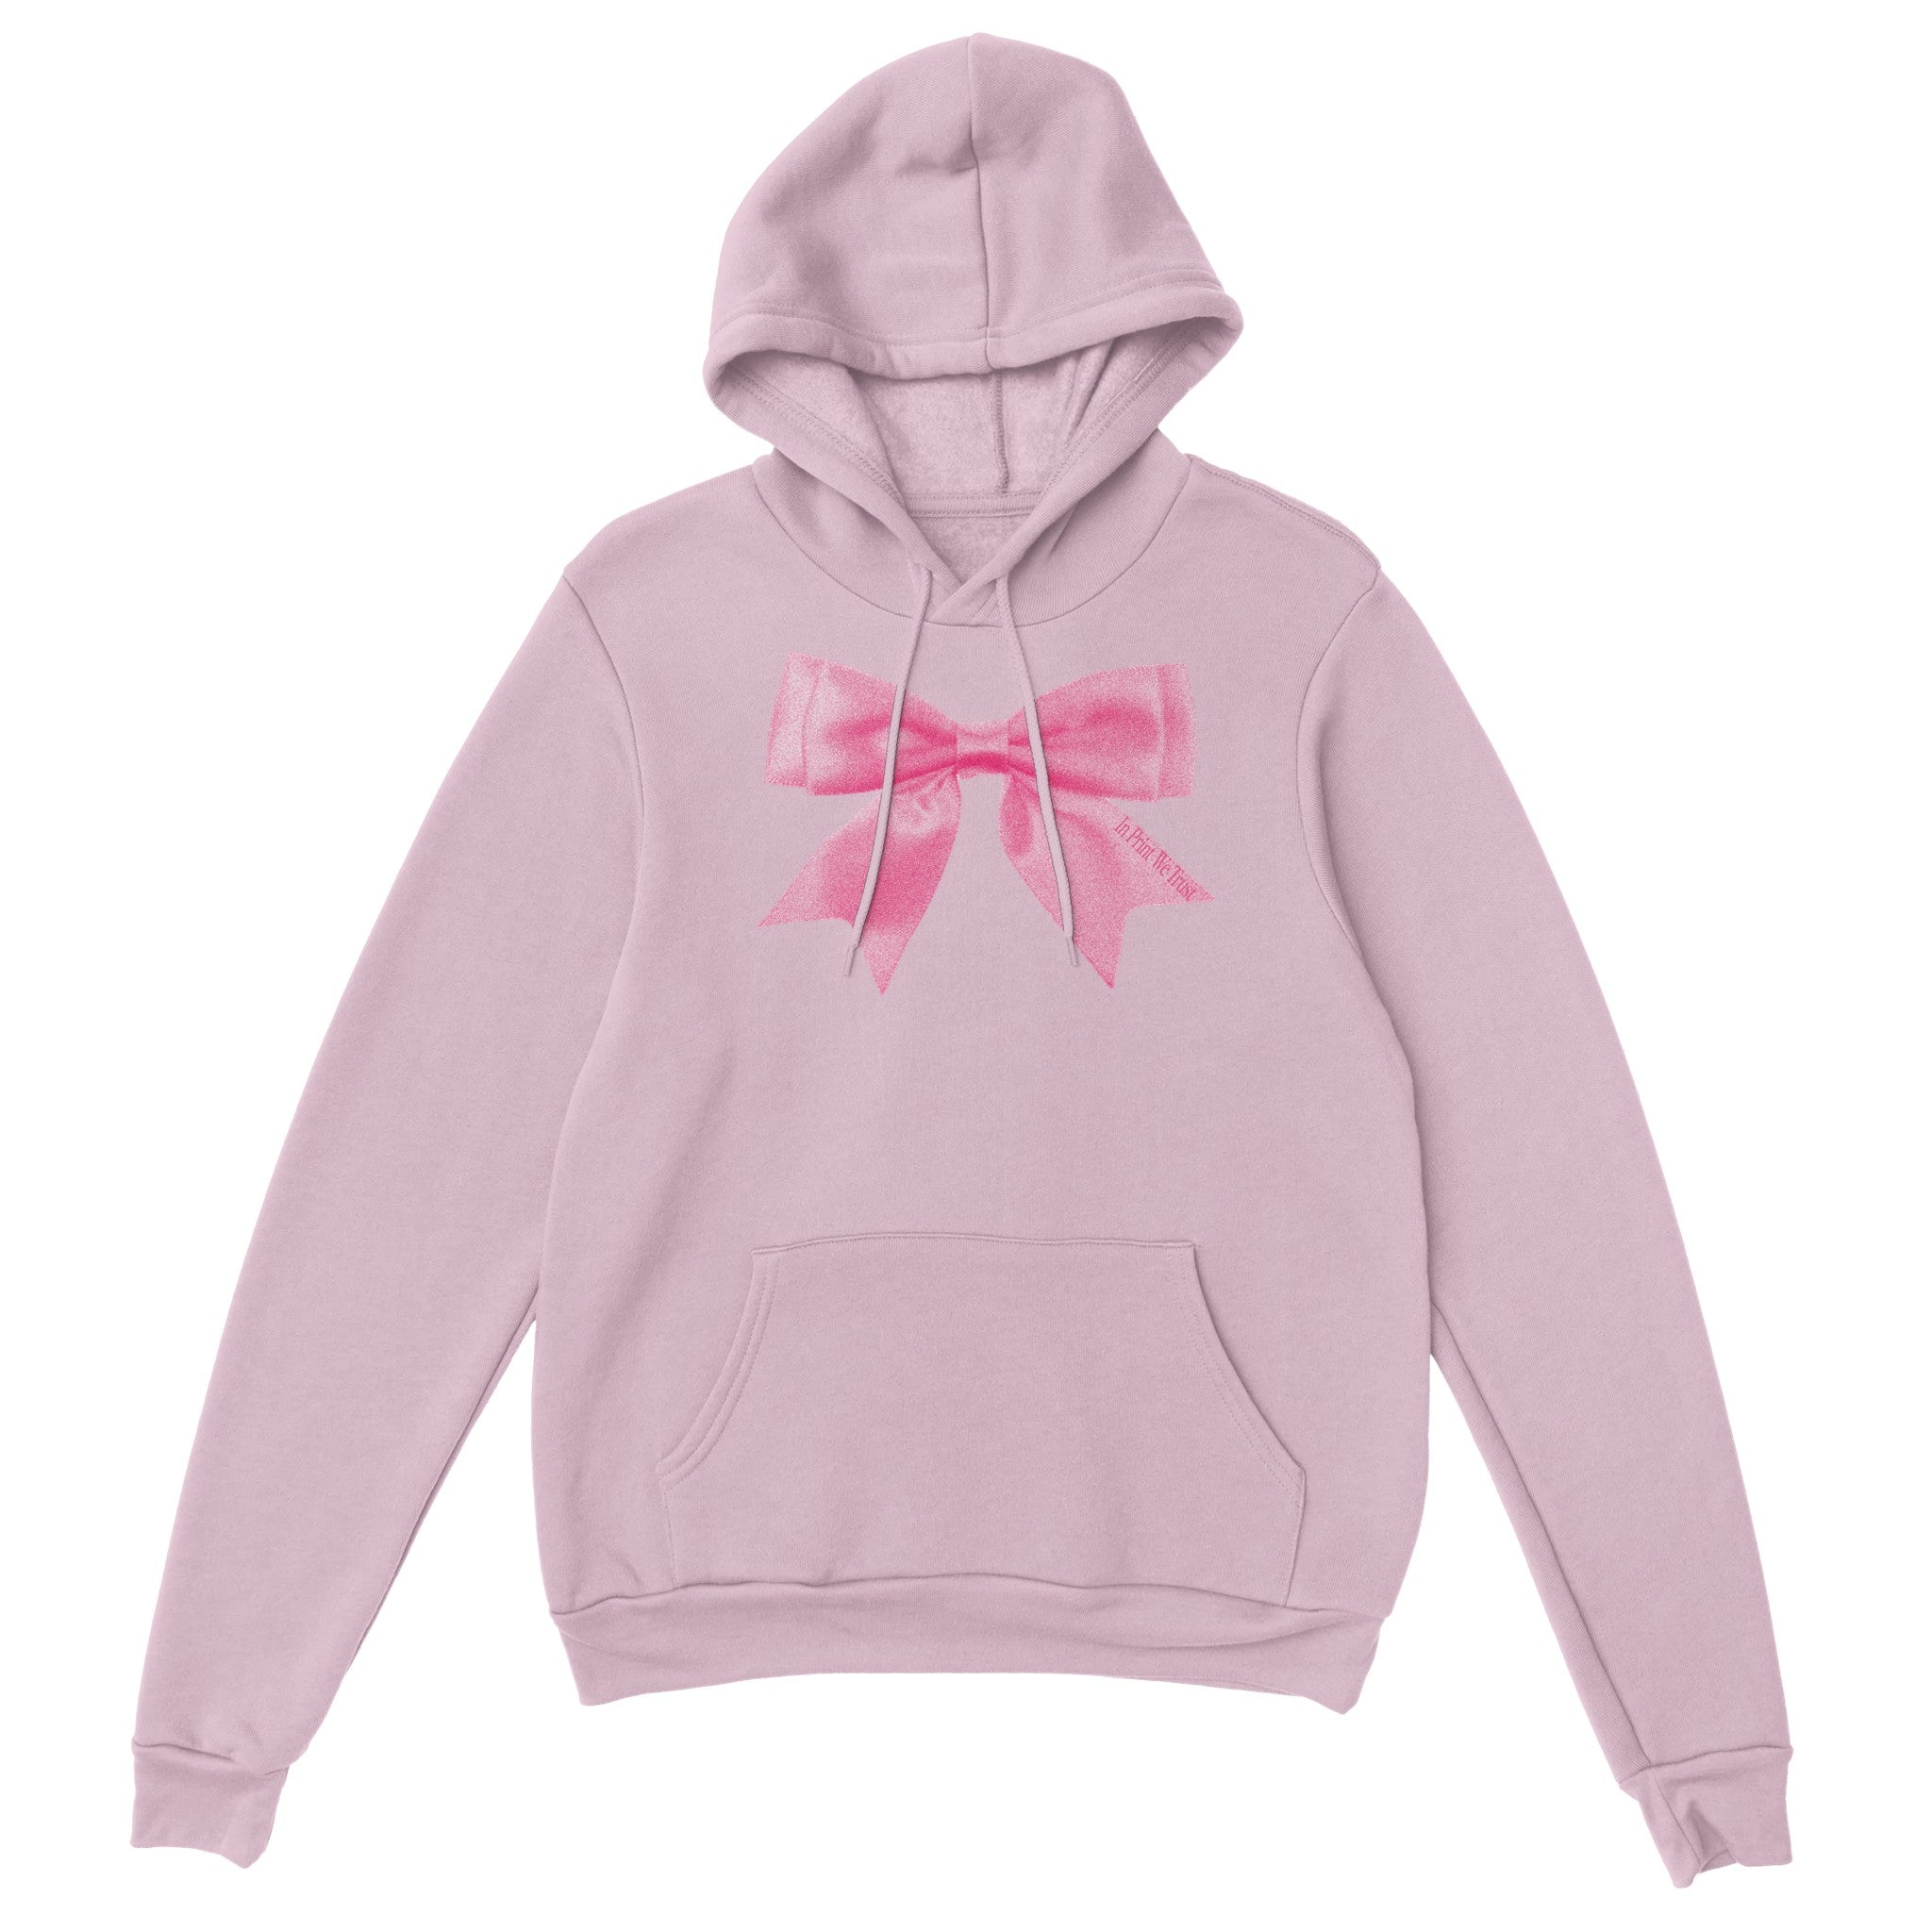 'Put a Bow On It' hoodie - In Print We Trust